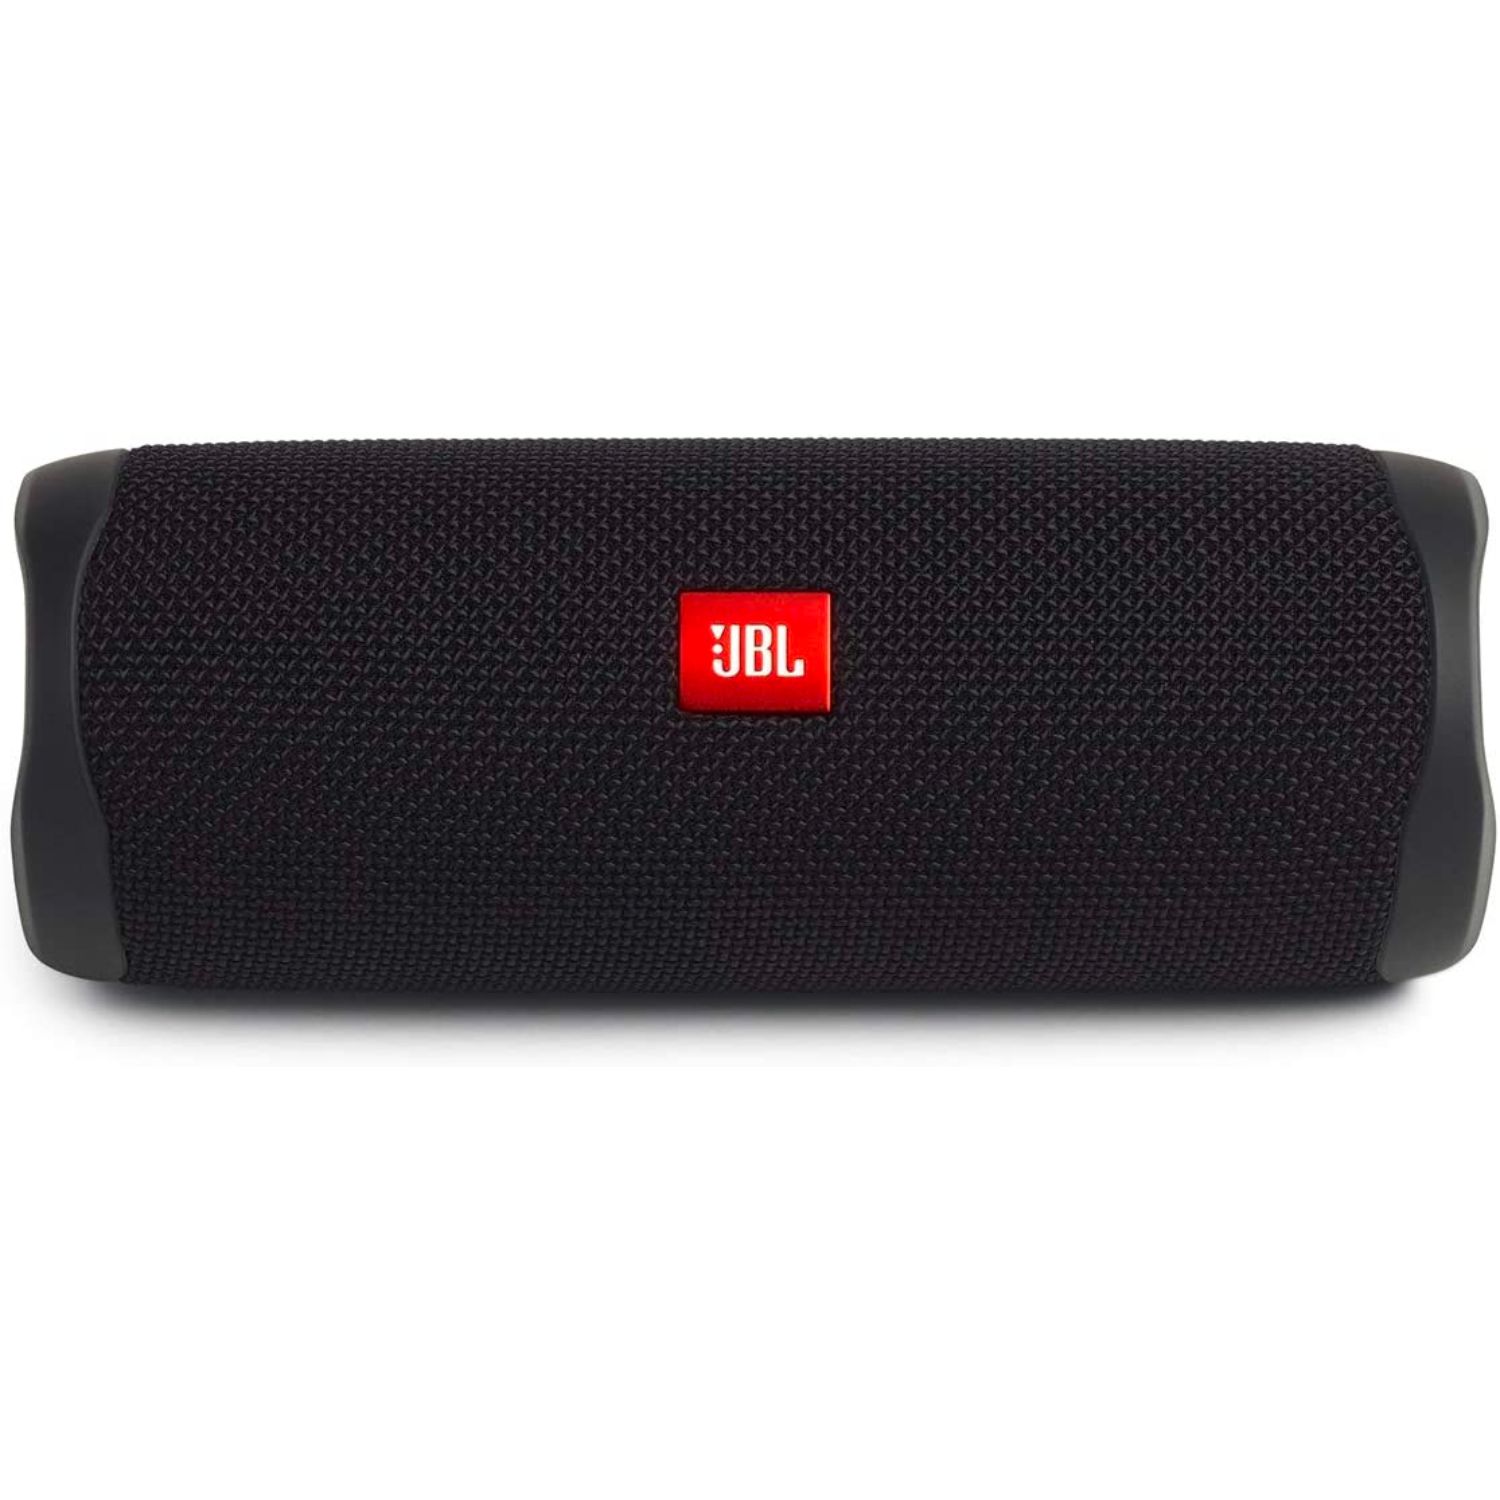 The Best Gifts for College Students: Portable Bluetooth Speaker